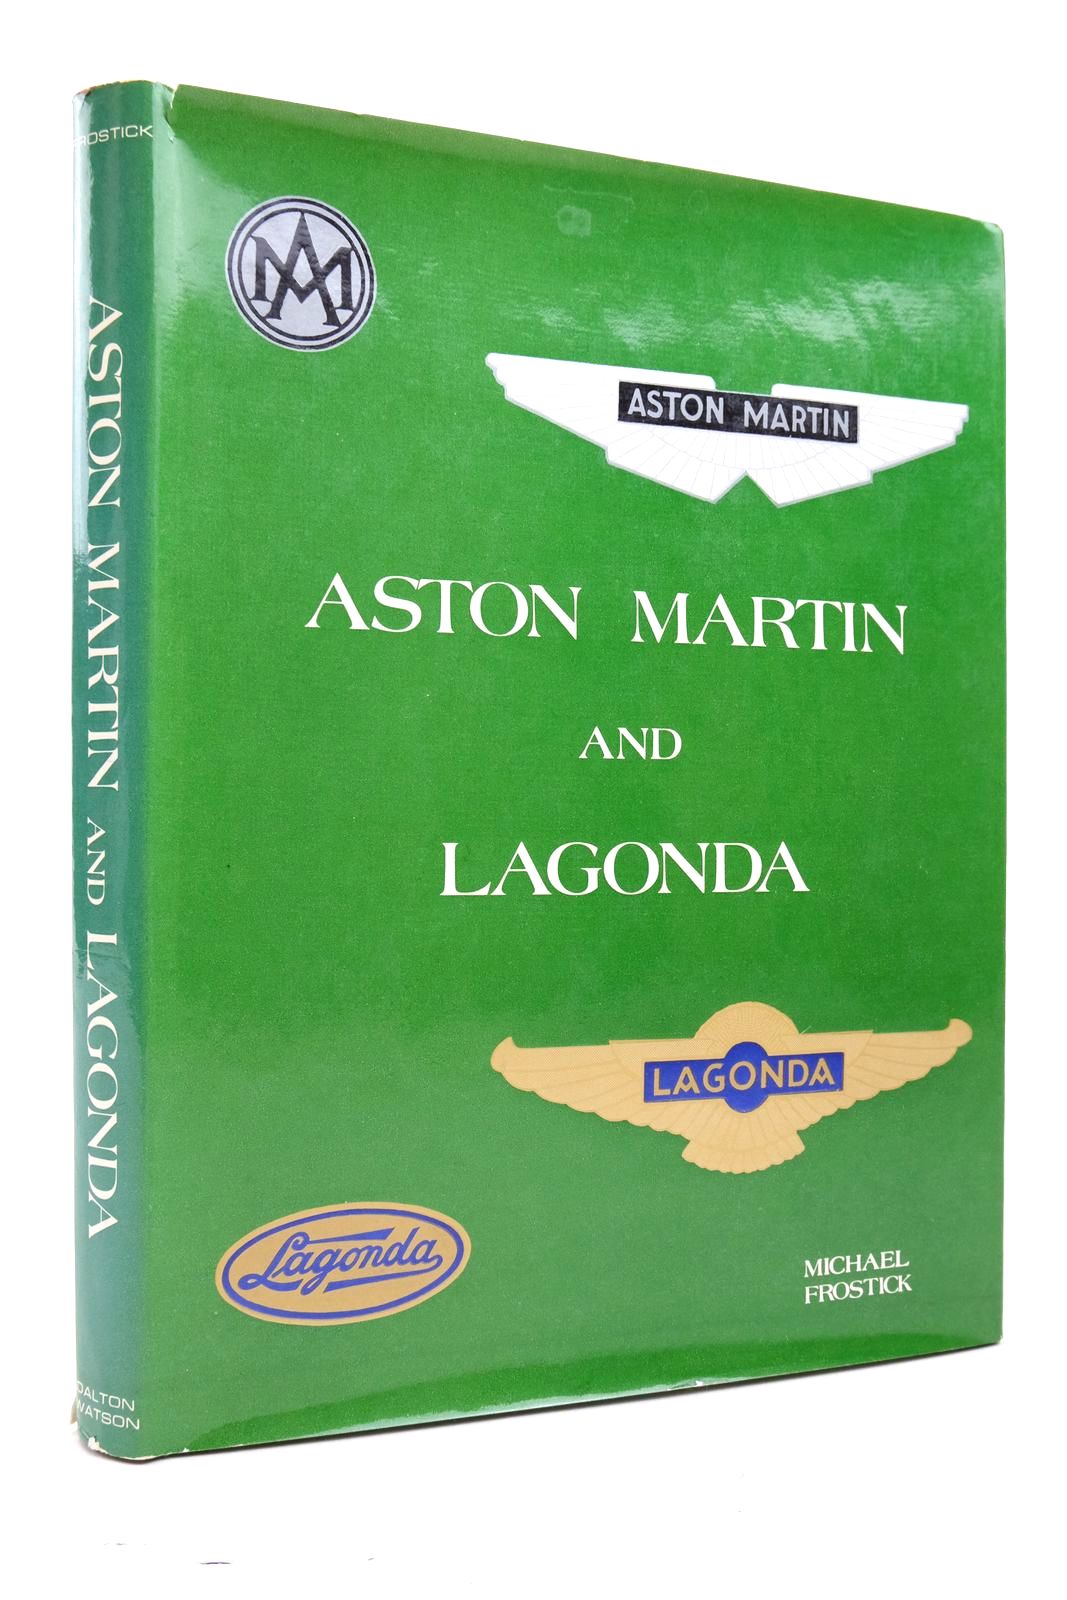 Photo of ASTON MARTIN AND LAGONDA written by Frostick, Michael published by Dalton Watson (STOCK CODE: 2136801)  for sale by Stella & Rose's Books